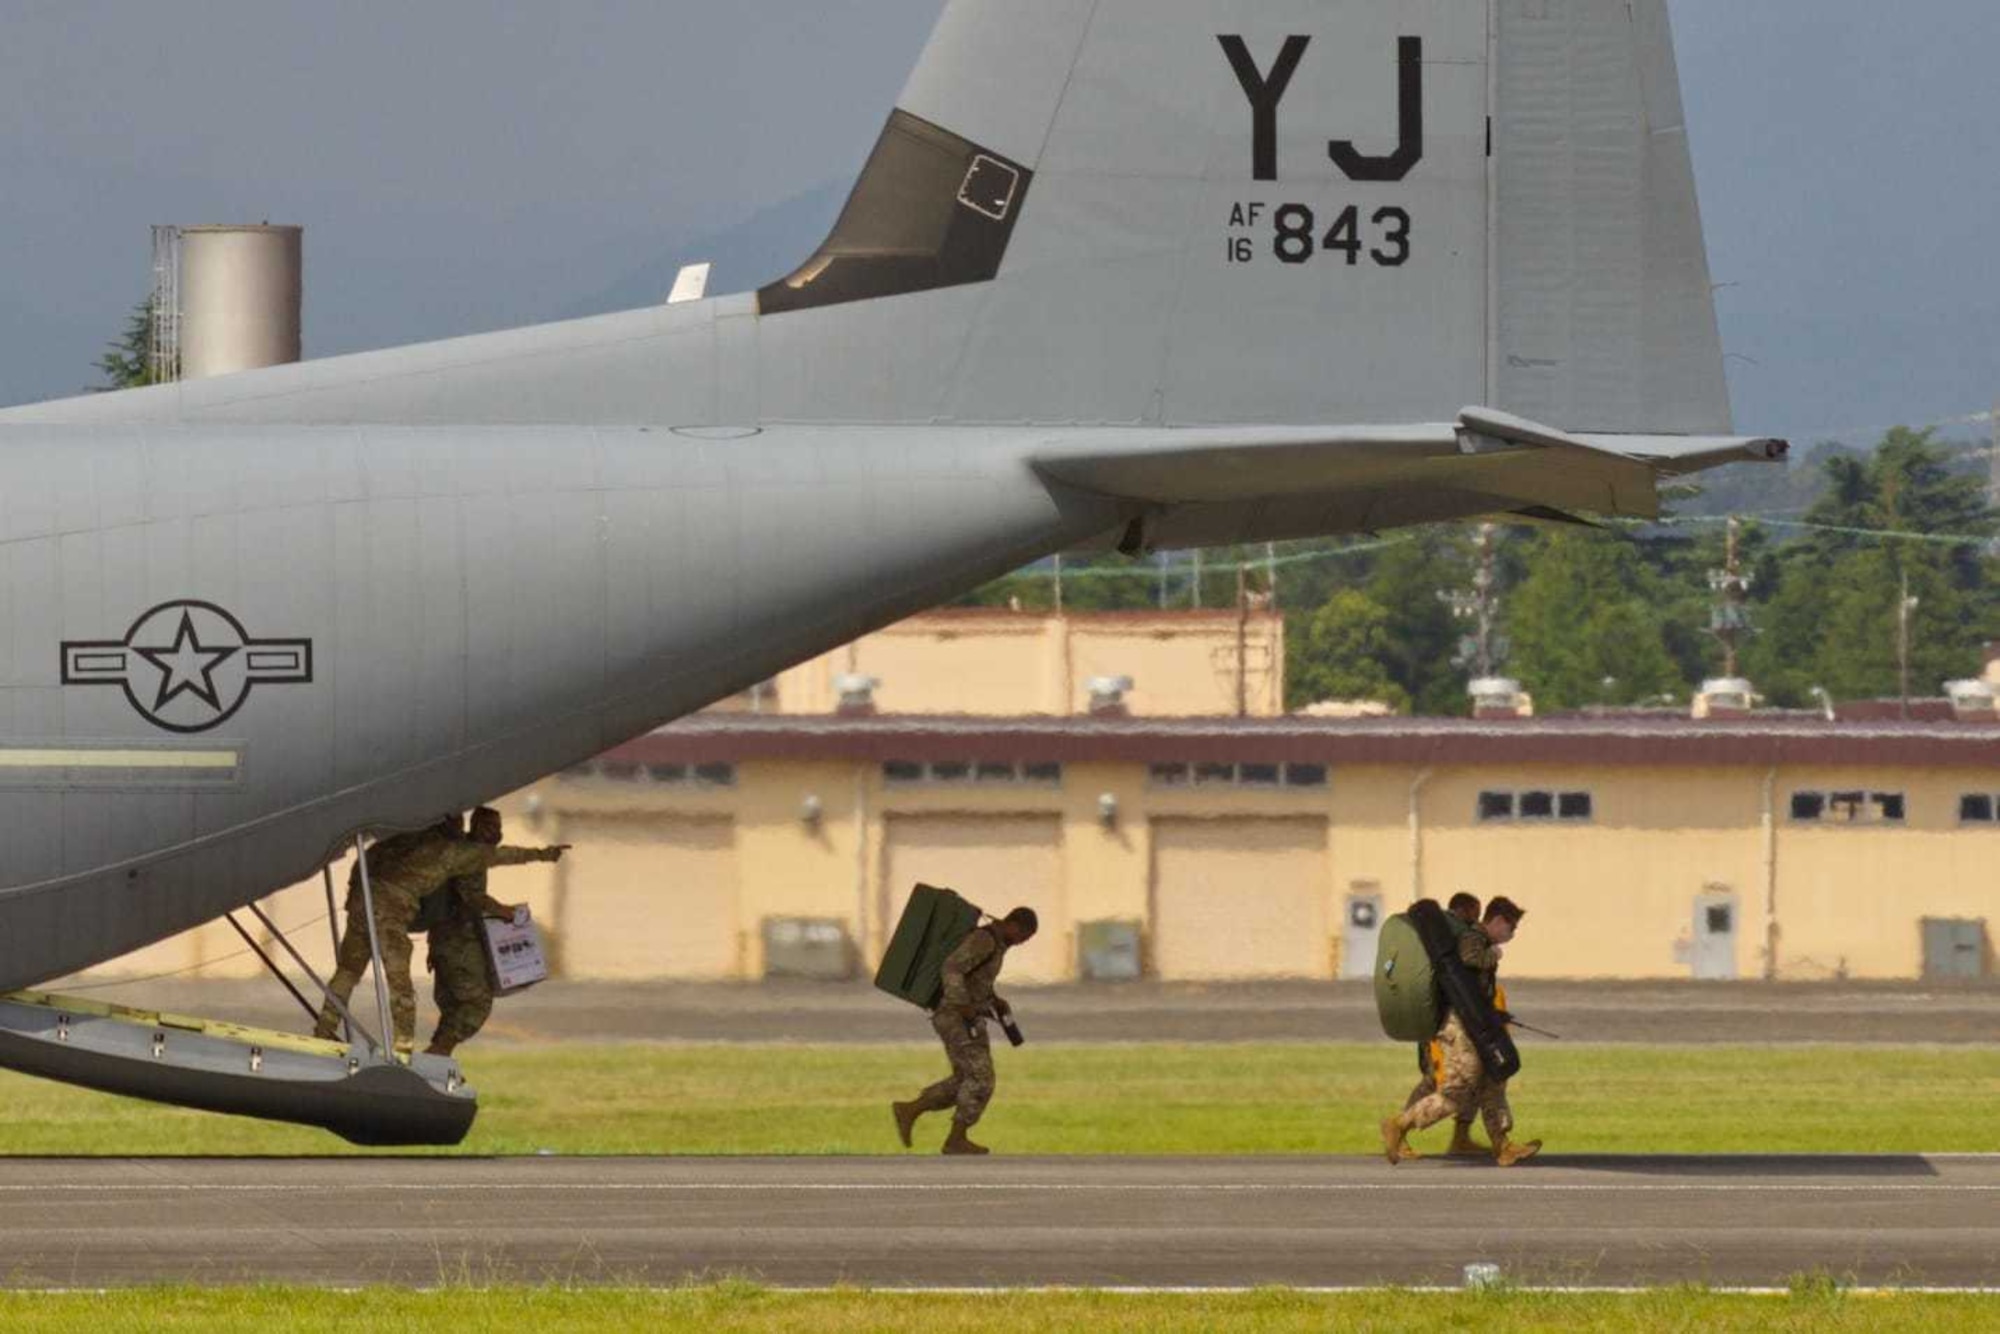 A small team of multi-capable Airmen from the 374th Operations Support Squadron airfield operations flight disembark a C-130J on the runway at Yokota Air Base, Japan, during an Agile Combat Employment proof-of-concept demo, Aug. 19, 2020. Airmen from across the OSS set-up, flyability checked, and operationalized a refurbished mobile Tactical Air Navigation system for use in under an hour. (Courtesy photo by Capt. Arie Church)